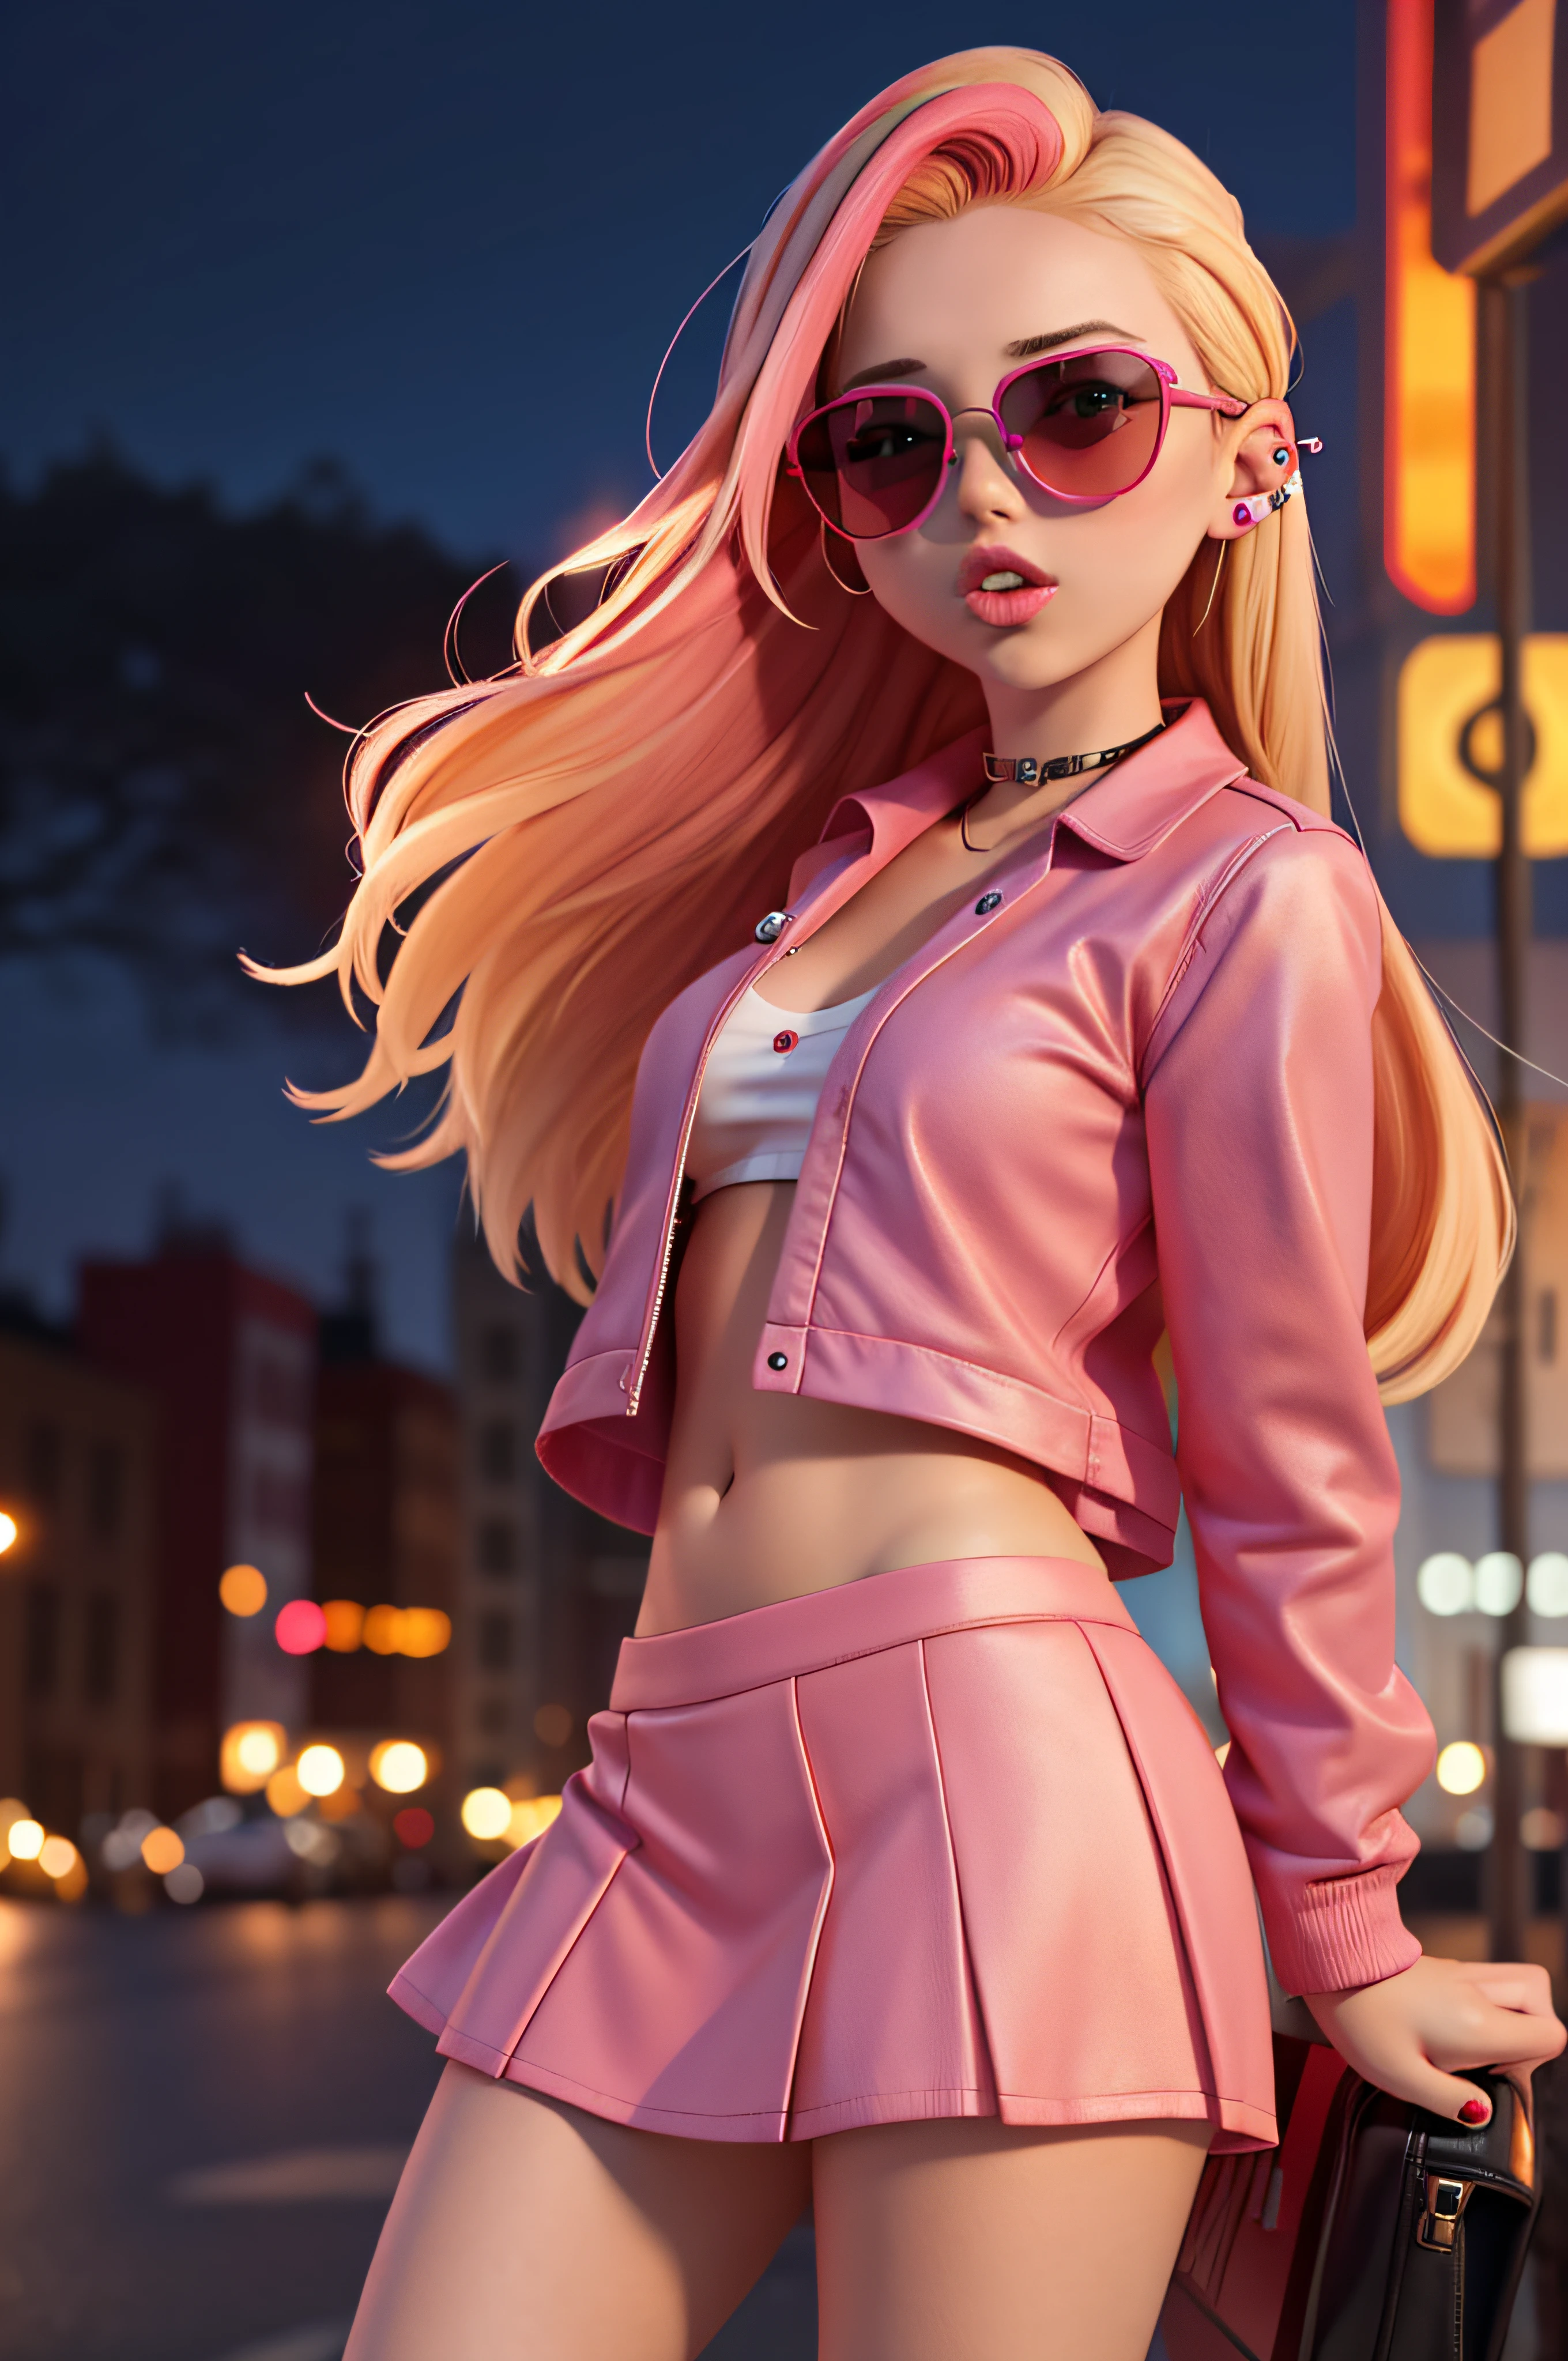 1 girl, 20 years old, blonde hair with red highlights, pink baby look, blue miniskirt, sunglasses, night city, mouth piercing